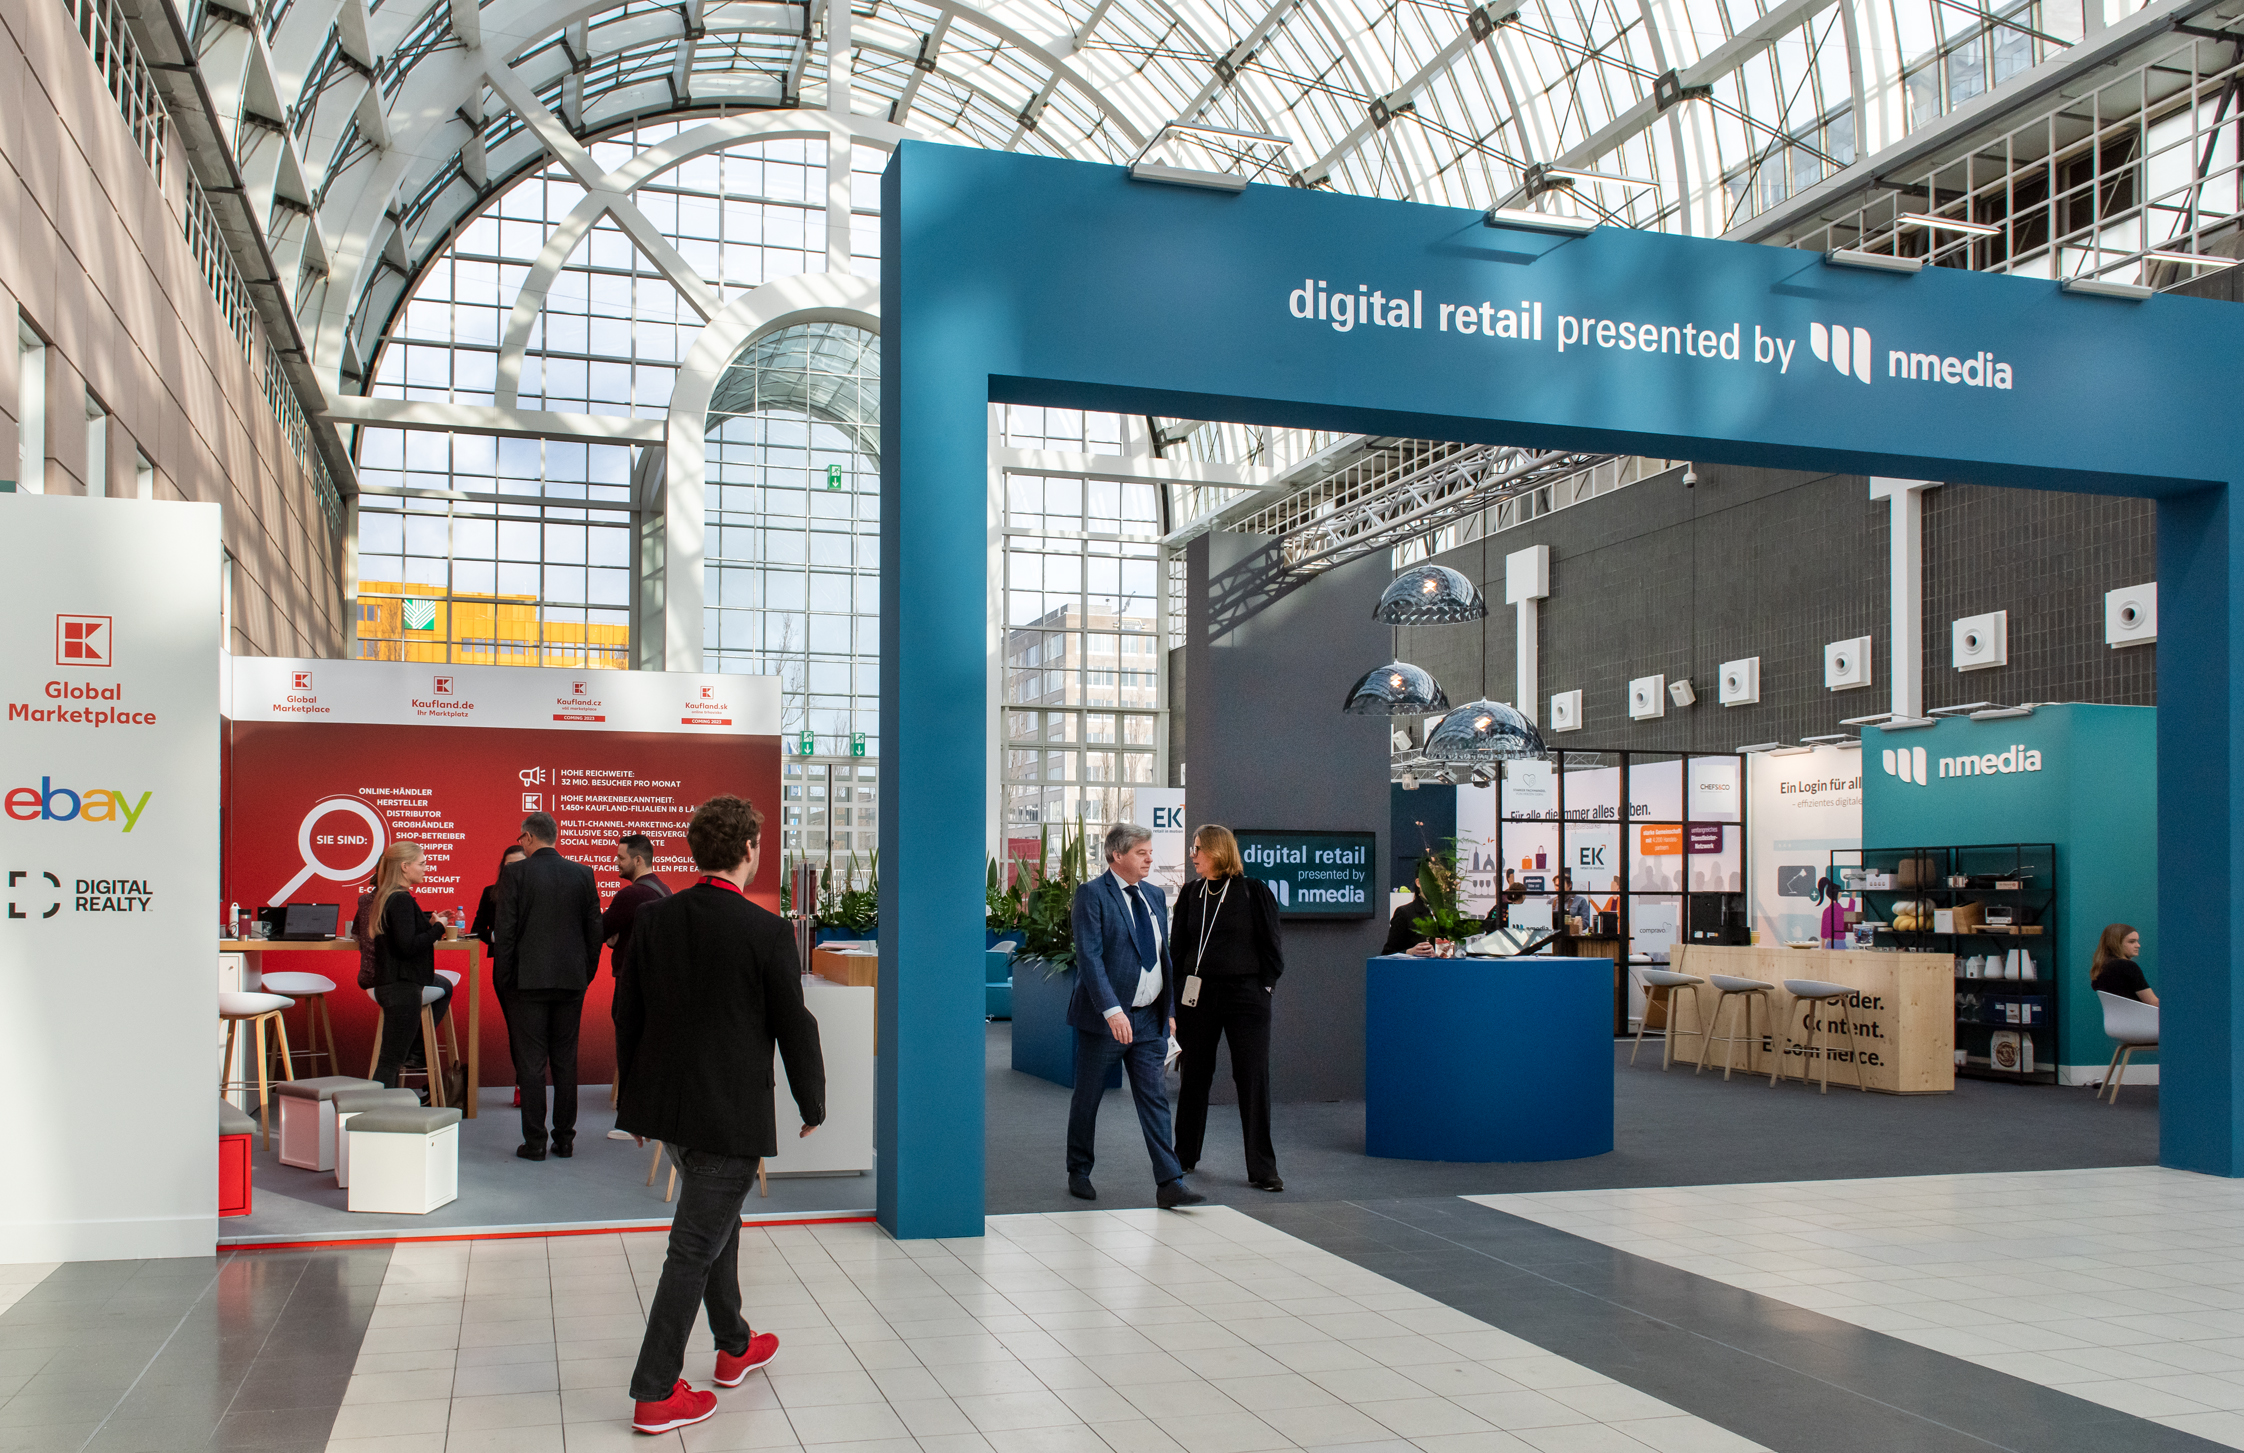 Digital retail presented by nmedia areal